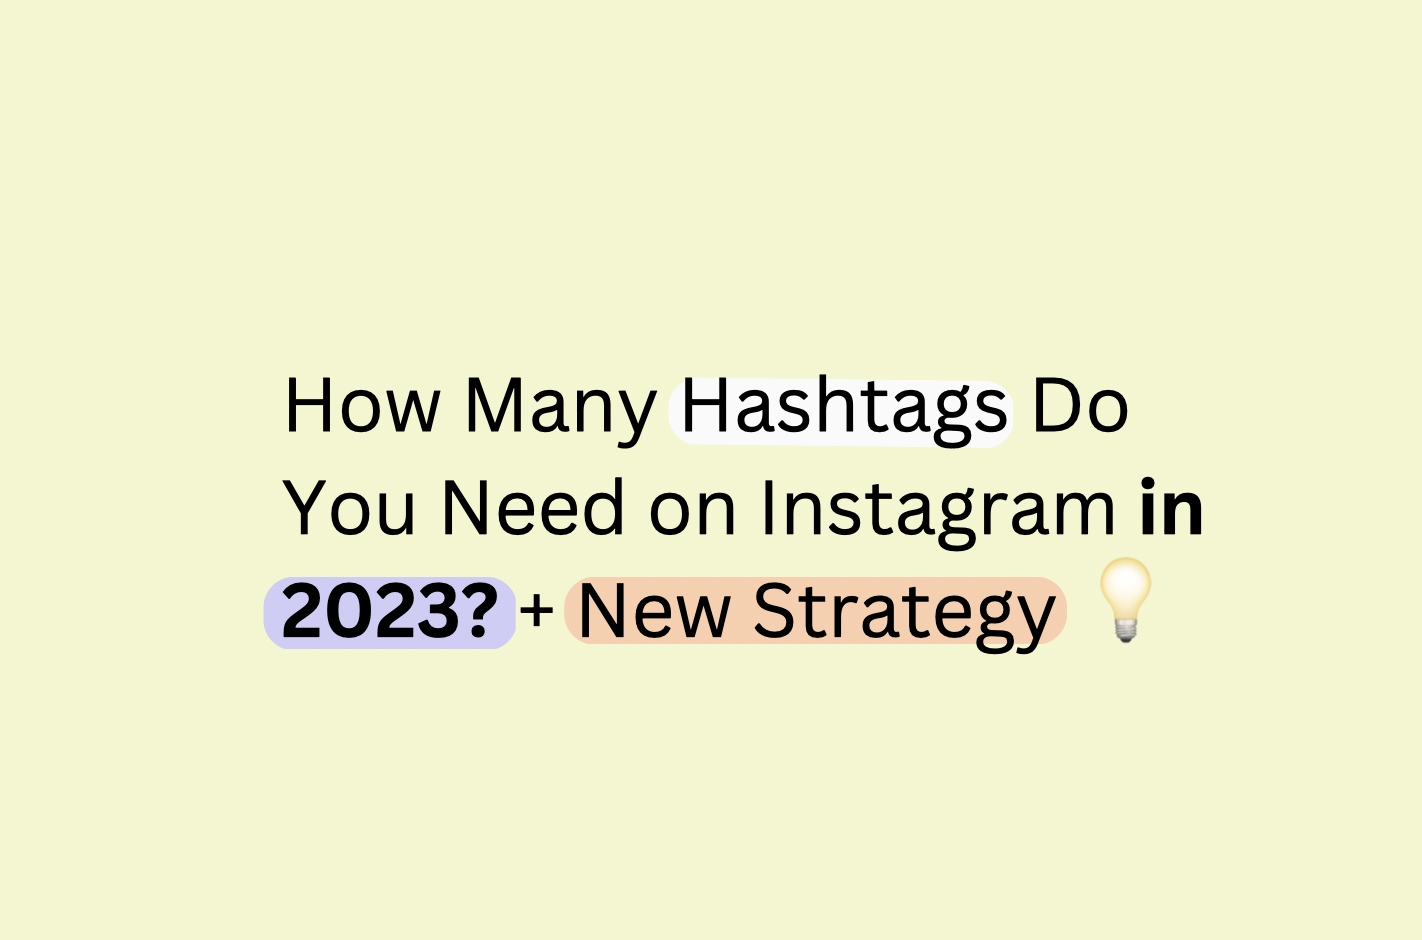 How Many Hashtags Do You Need on Instagram in 2023? + New Strategy